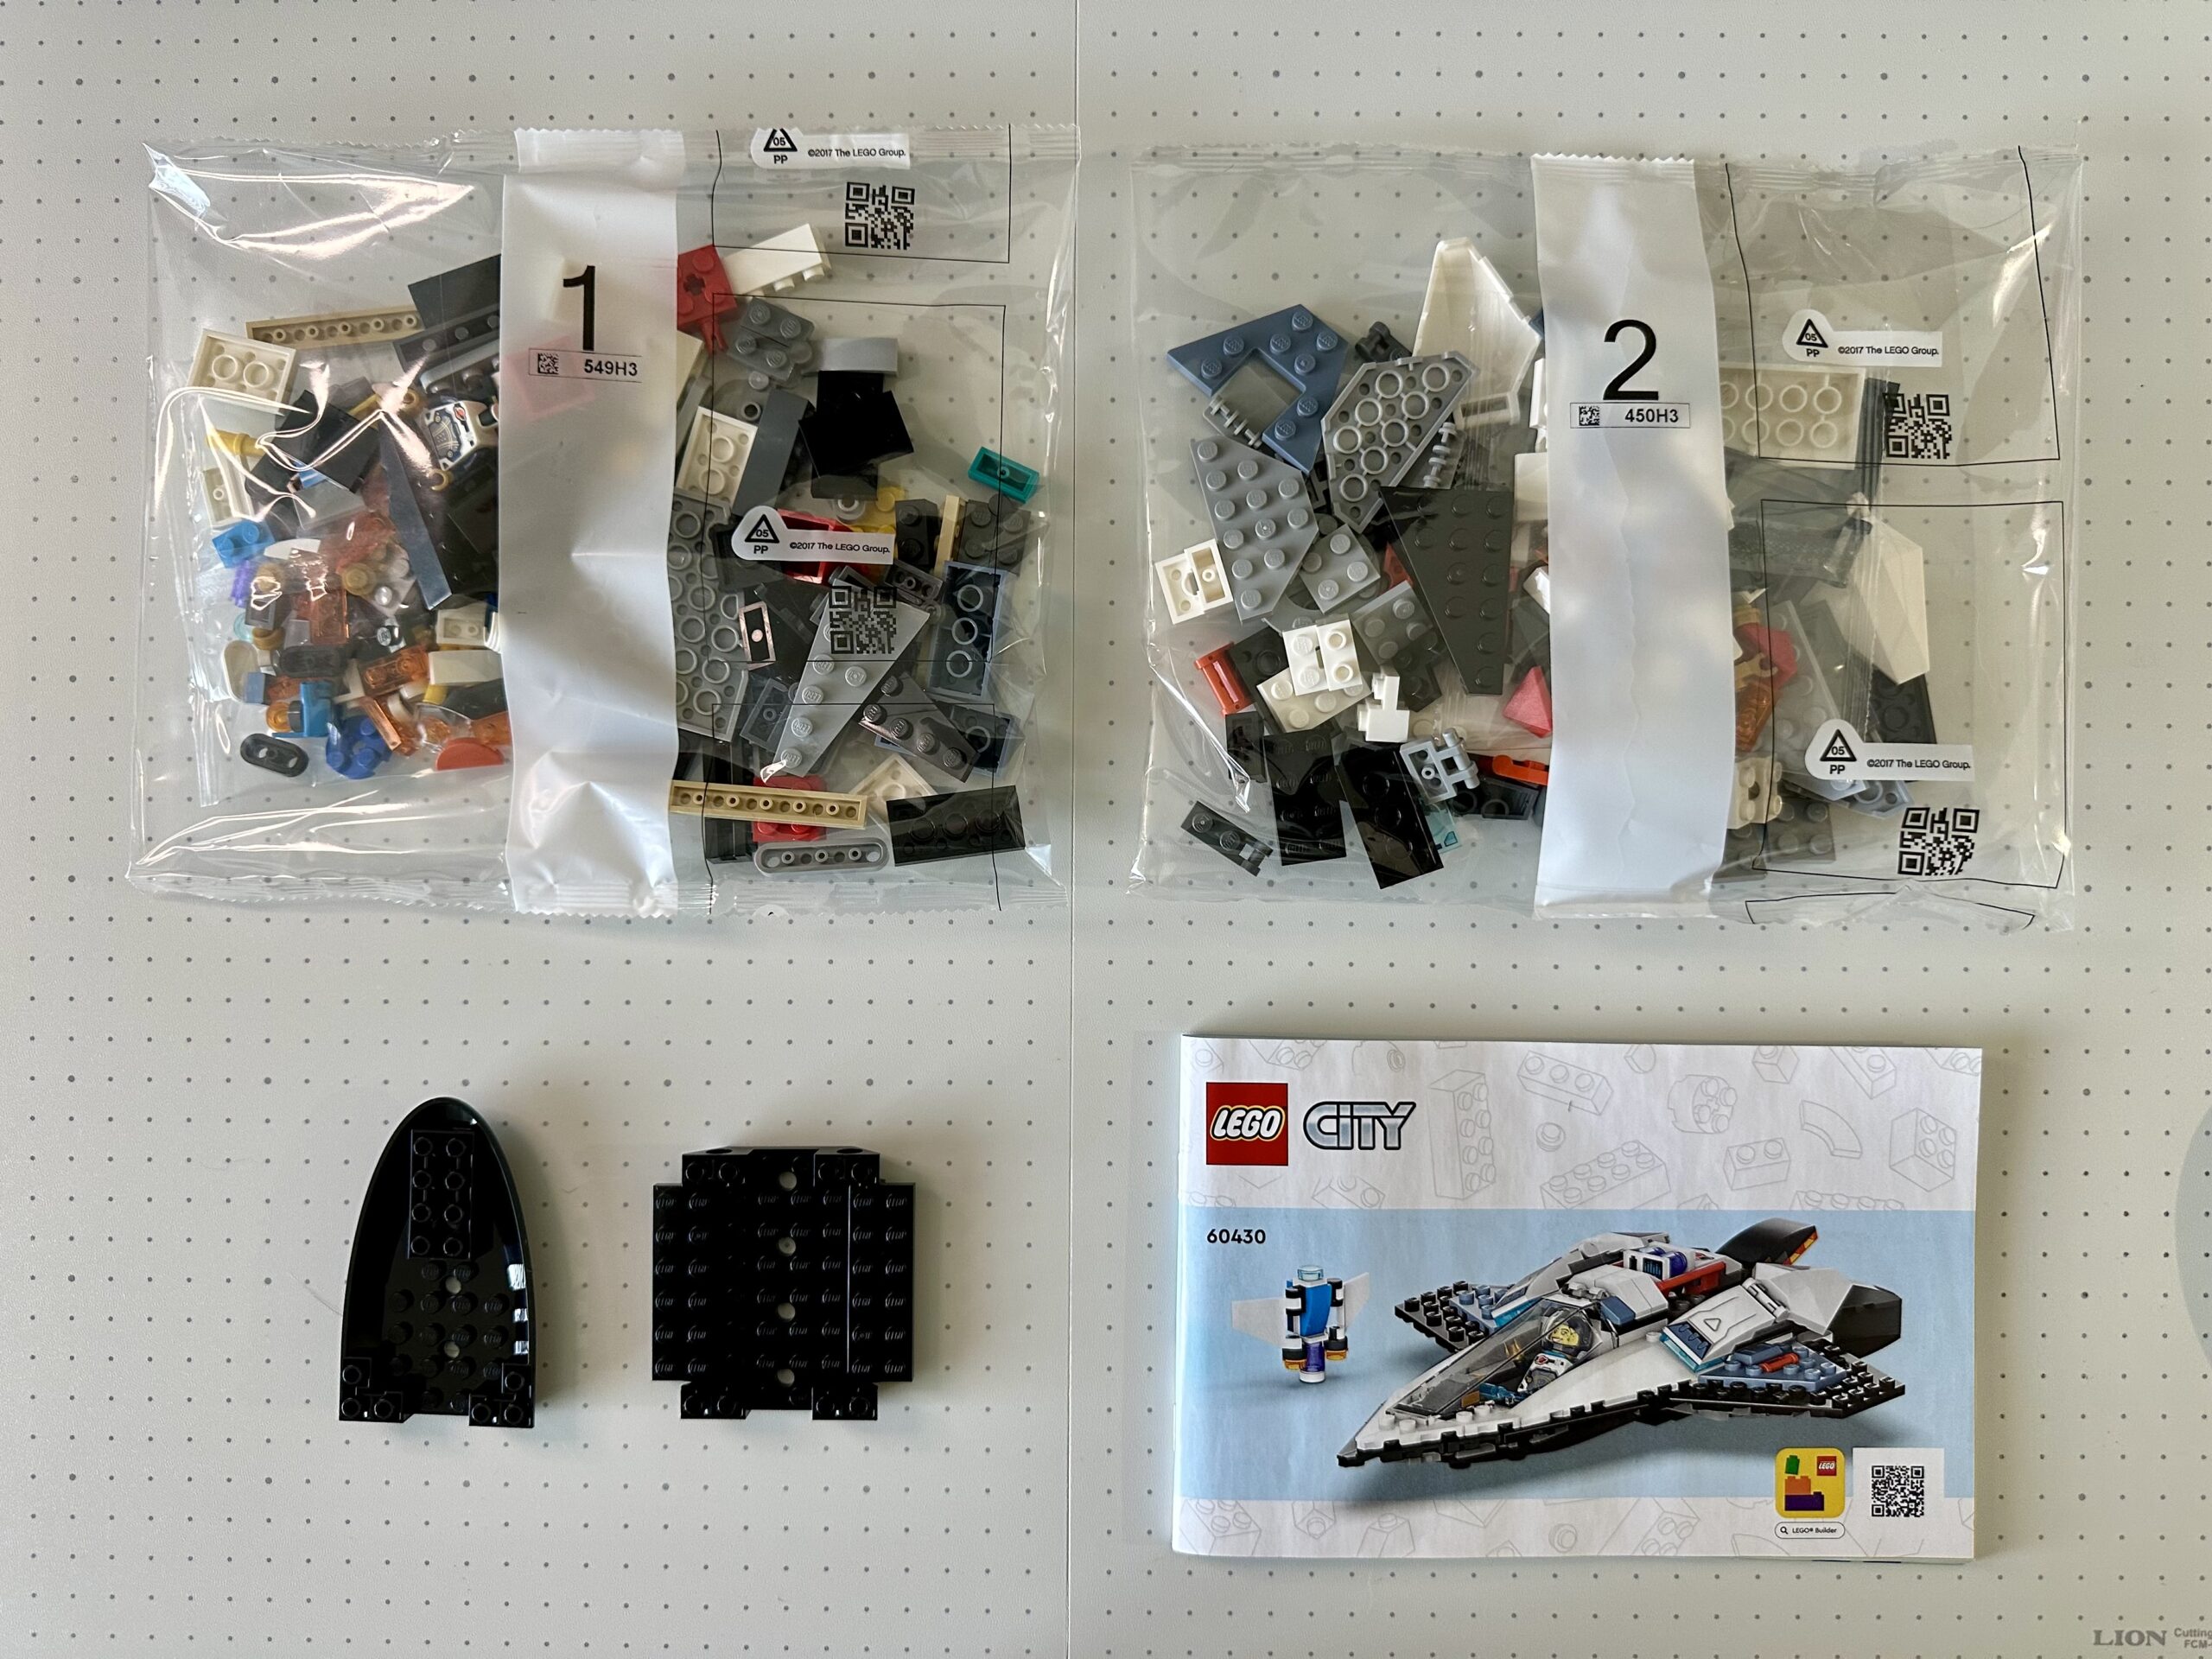 Two numbered bags of parts, instruction manual, and two larger loose pieces for LEGO set 60430.